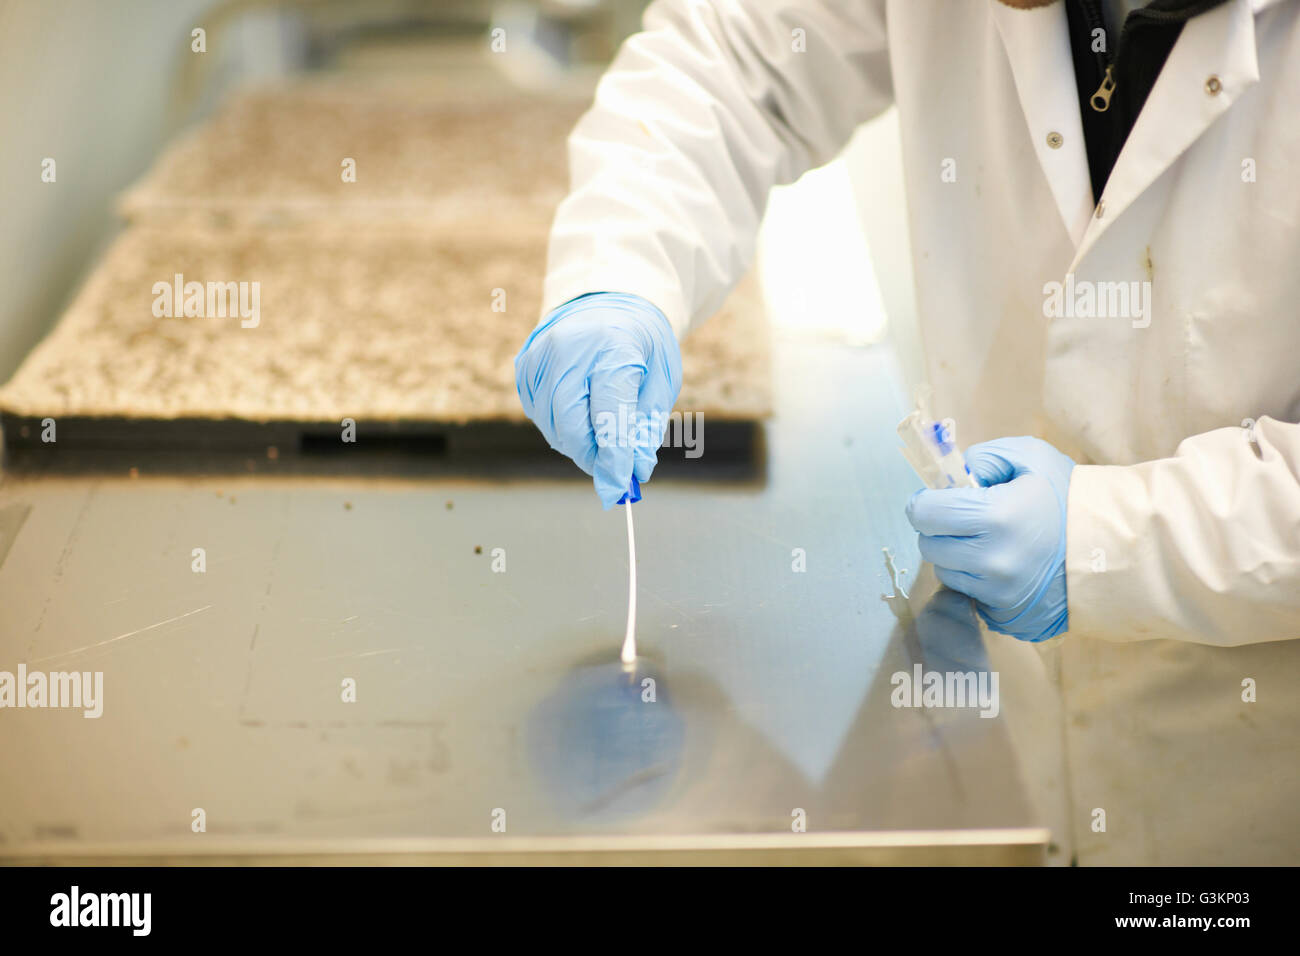 Worker wearing latex gloves swabbing stainless steel counter Stock Photo